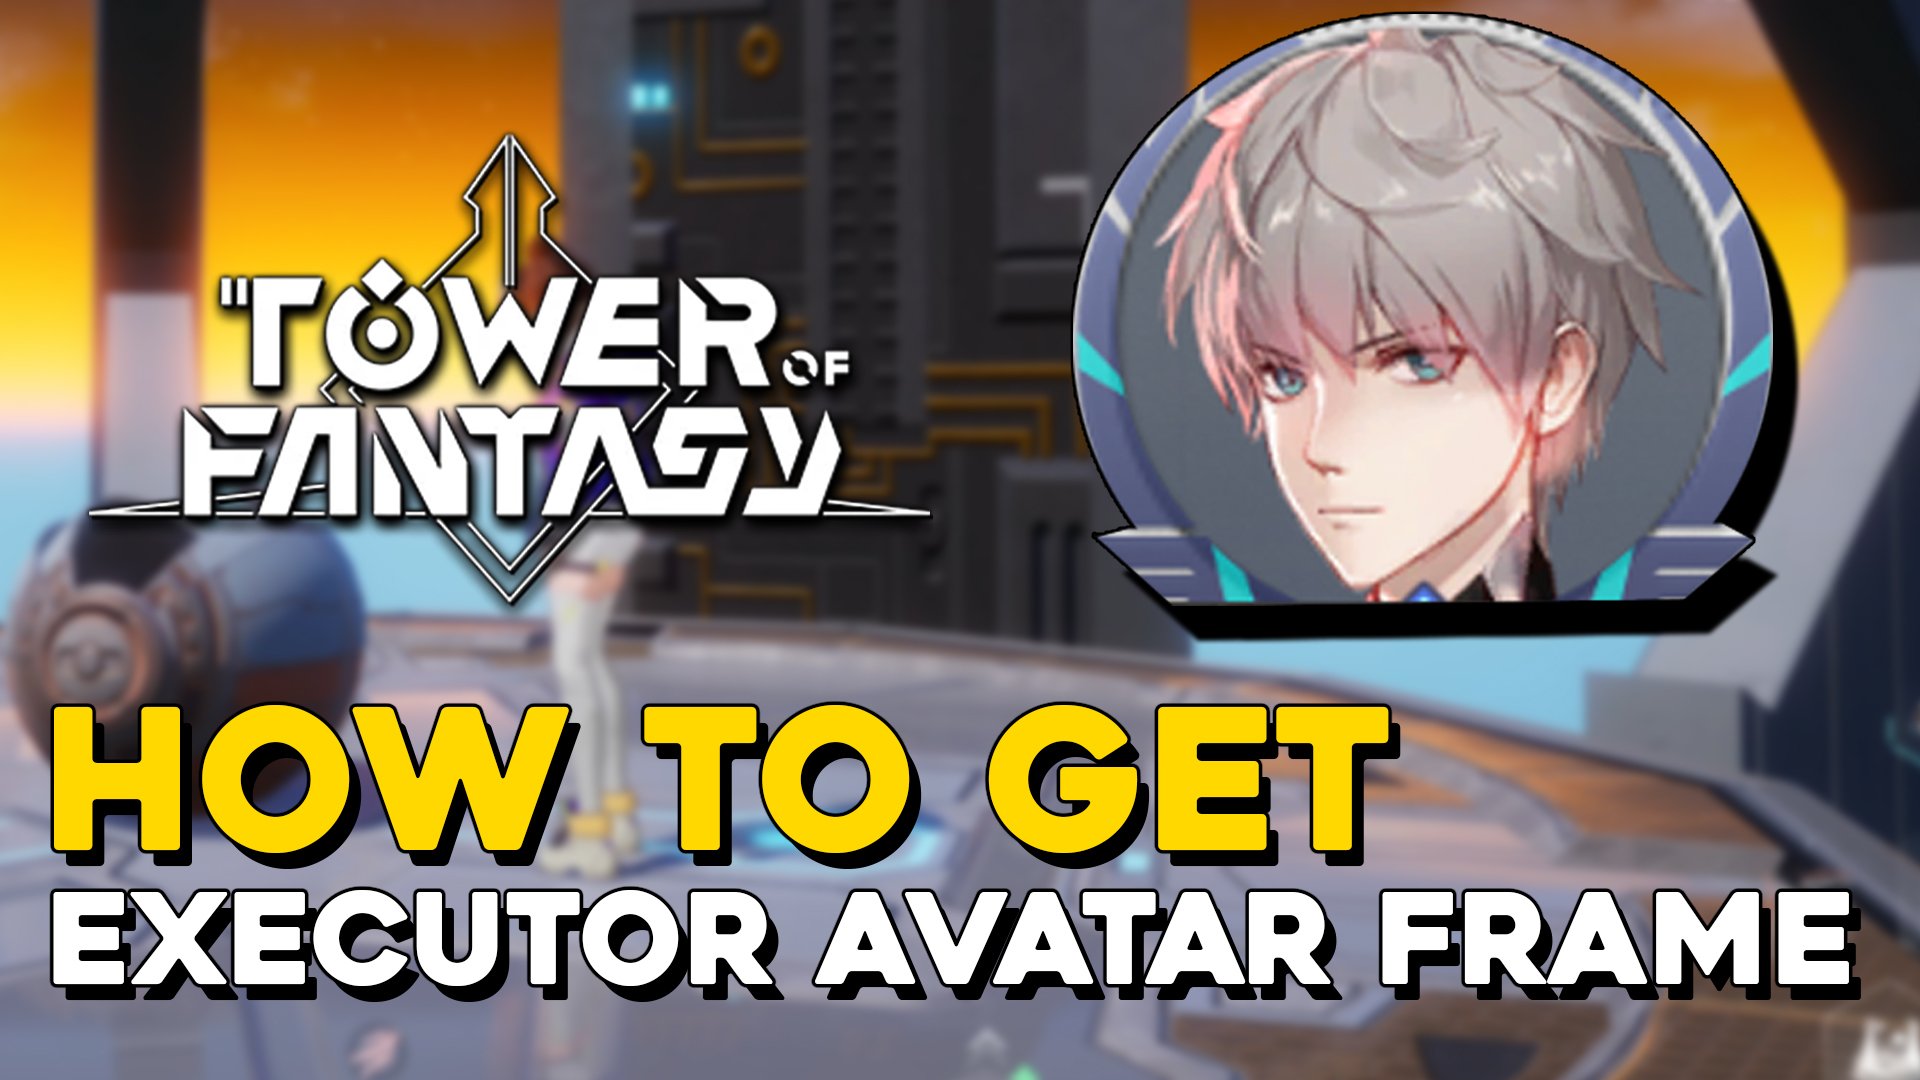 Tower Of Fantasy How To Get The Executor Avatar Frame.jpg